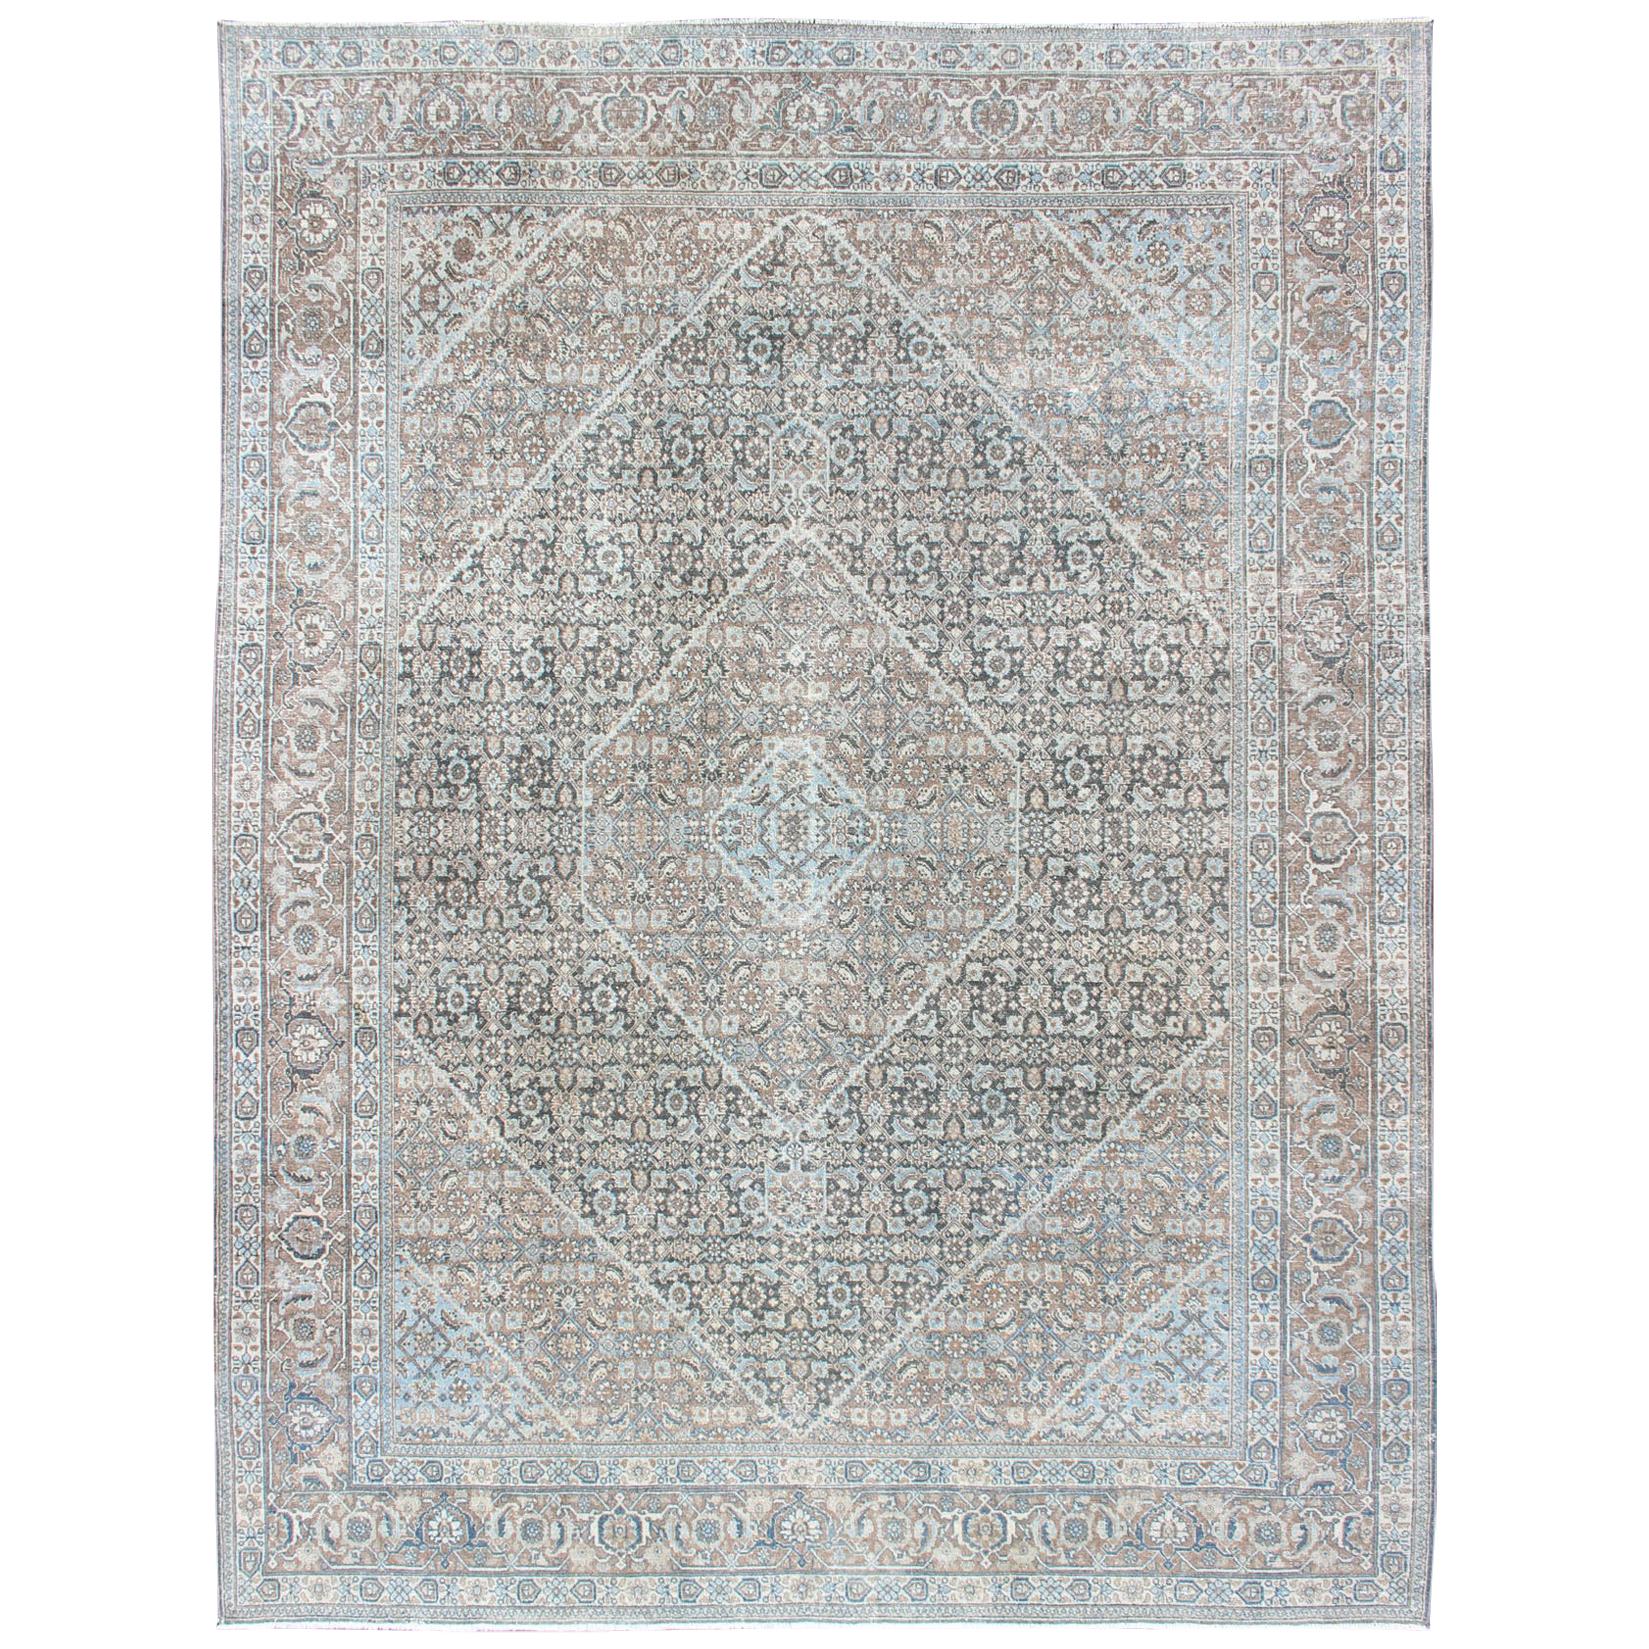 Medium Blue and Gray Background Persian Tabriz Rug with All-Over Herati Design